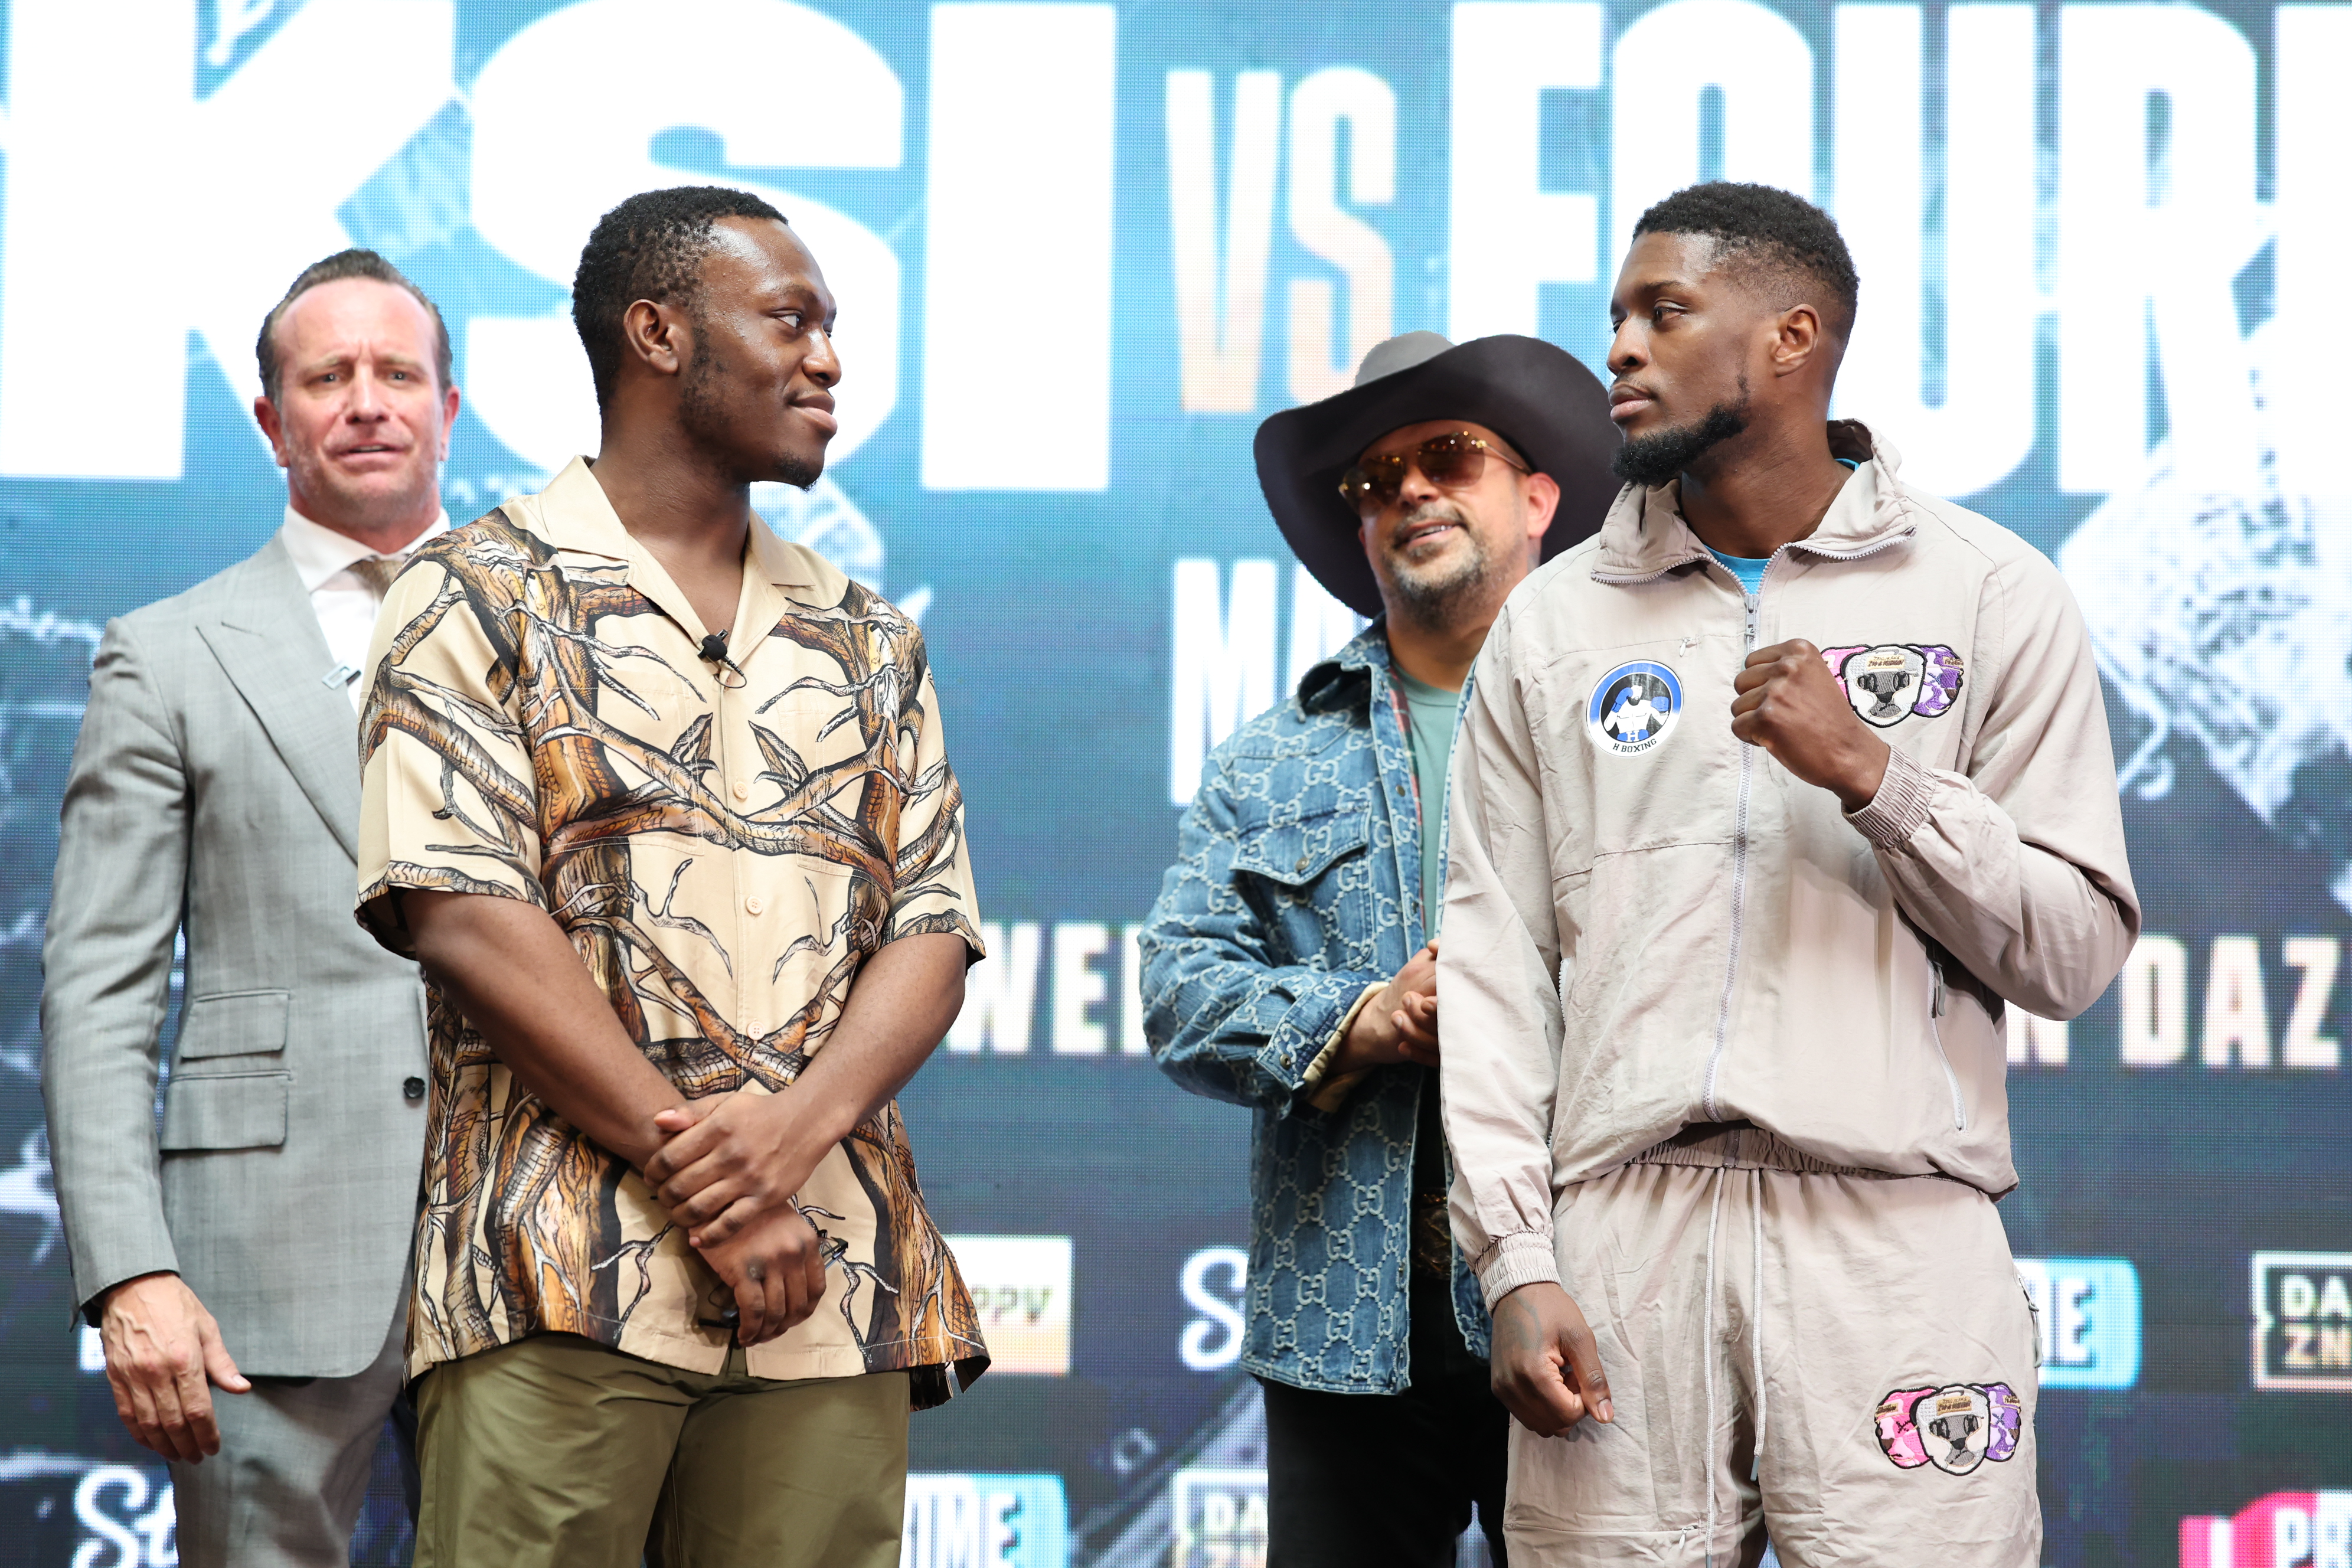 , KSI reveals fighting on same night as brother Deji stresses out their parents but ‘unites us even more’